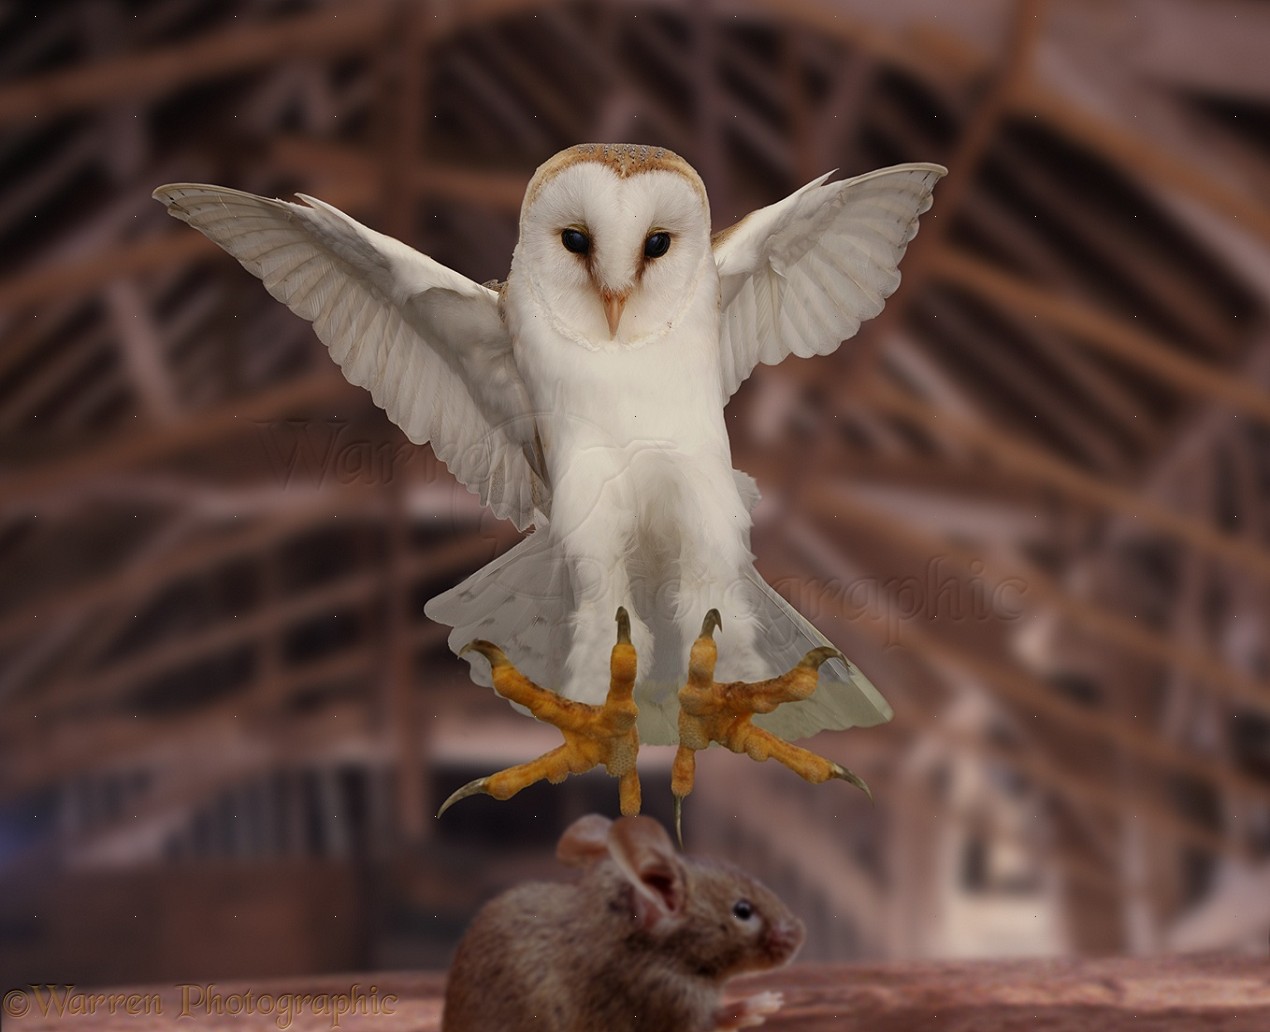 Animals Photographs: Barn Owl Pouncing on Mouse, WP11414.